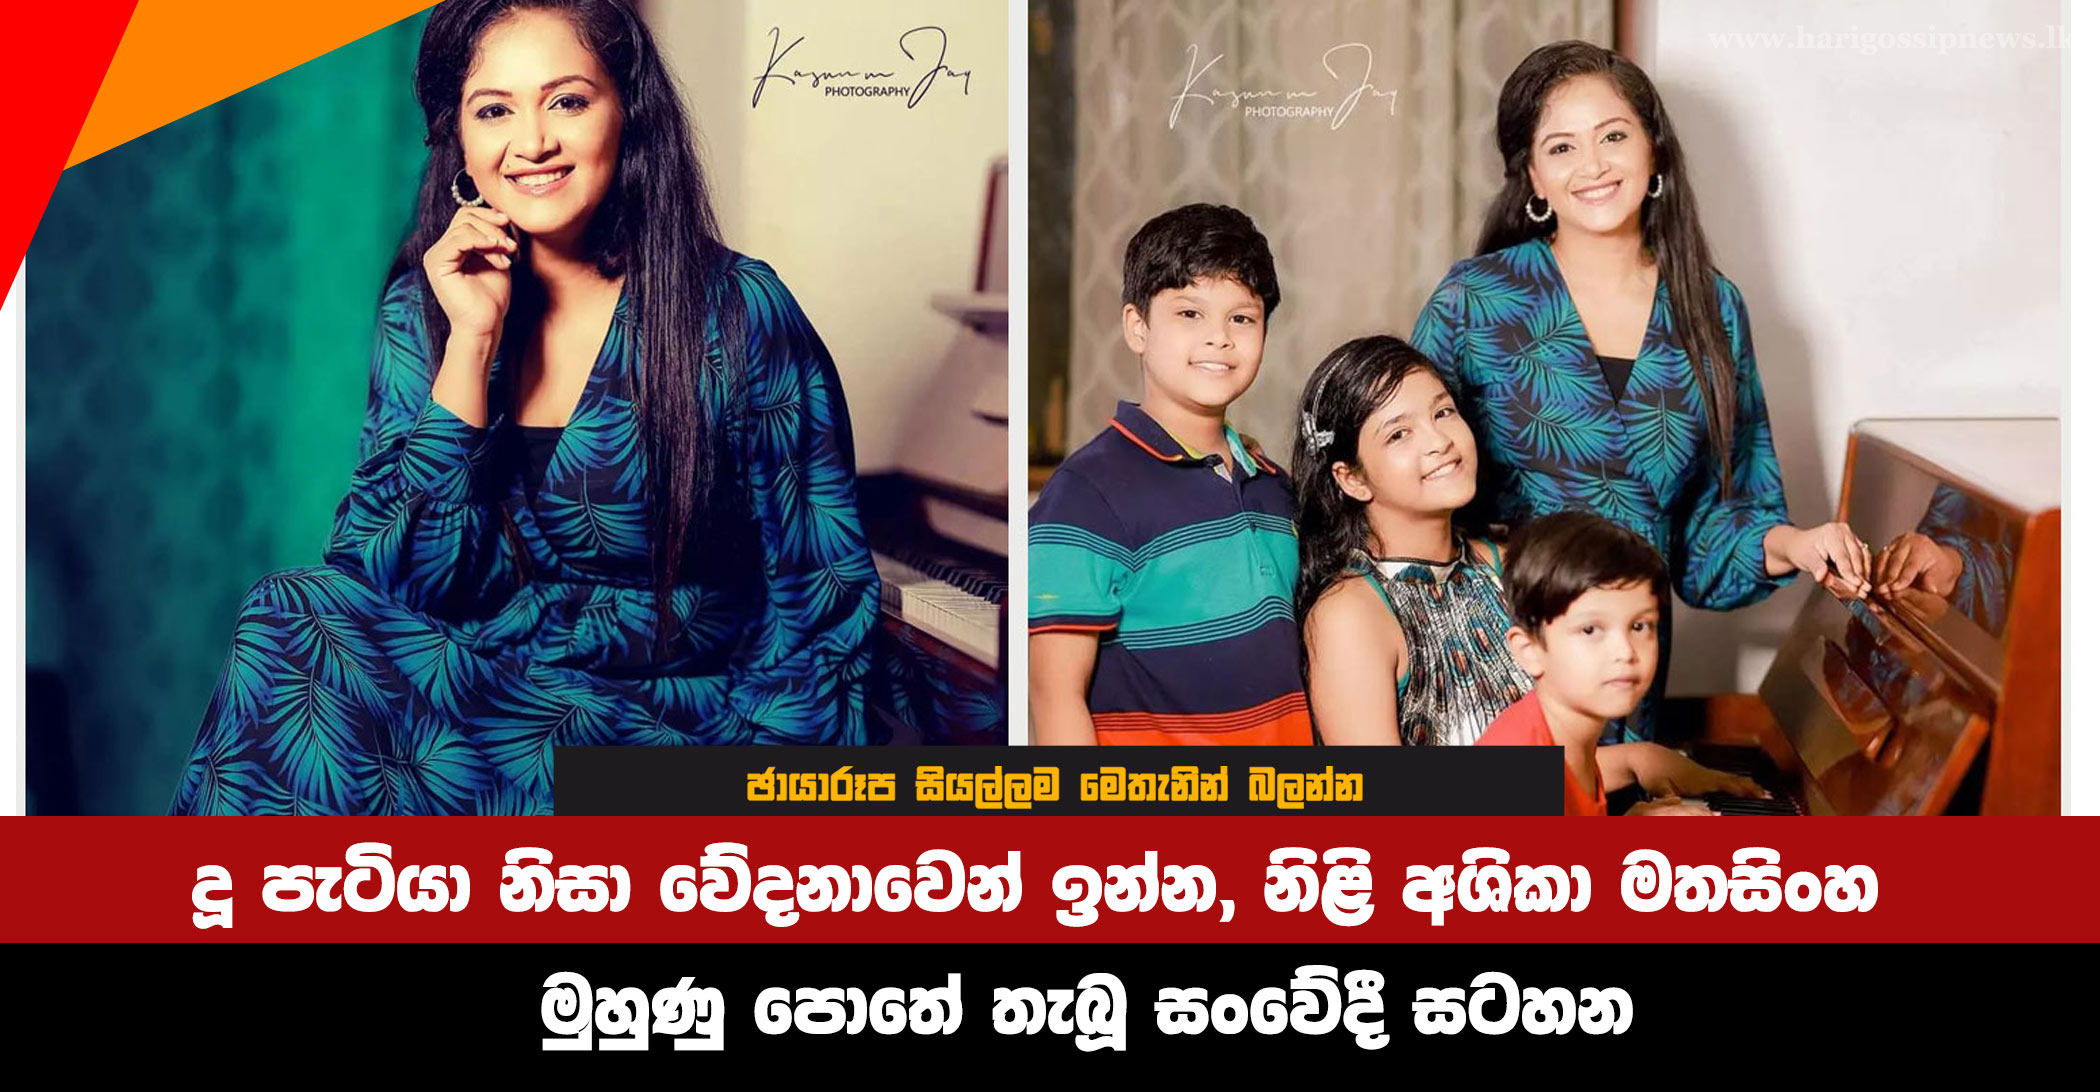 Actress-Ashika-Mathasinghe's-emotional-note-on-her-face-book